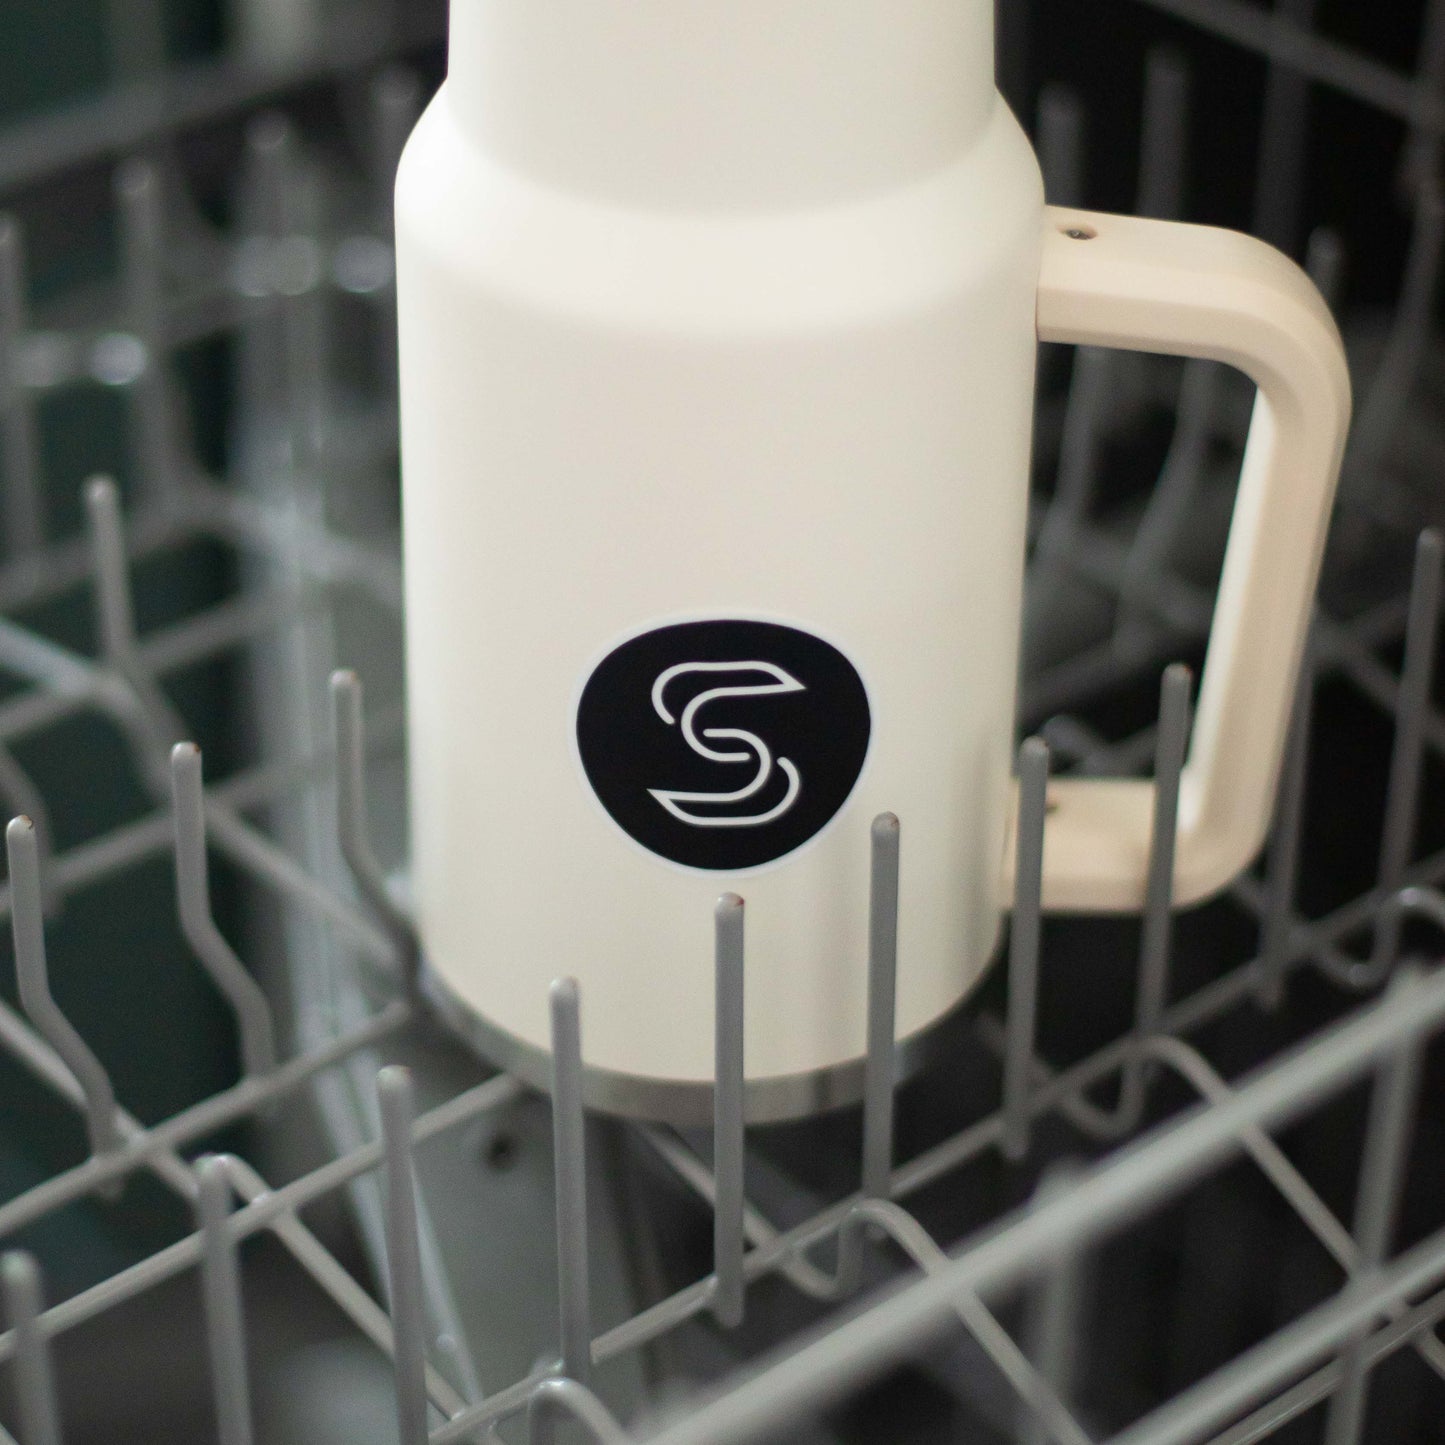 A circular black vinyl sticker of the Stickr logo on a water bottle in a dishwasher